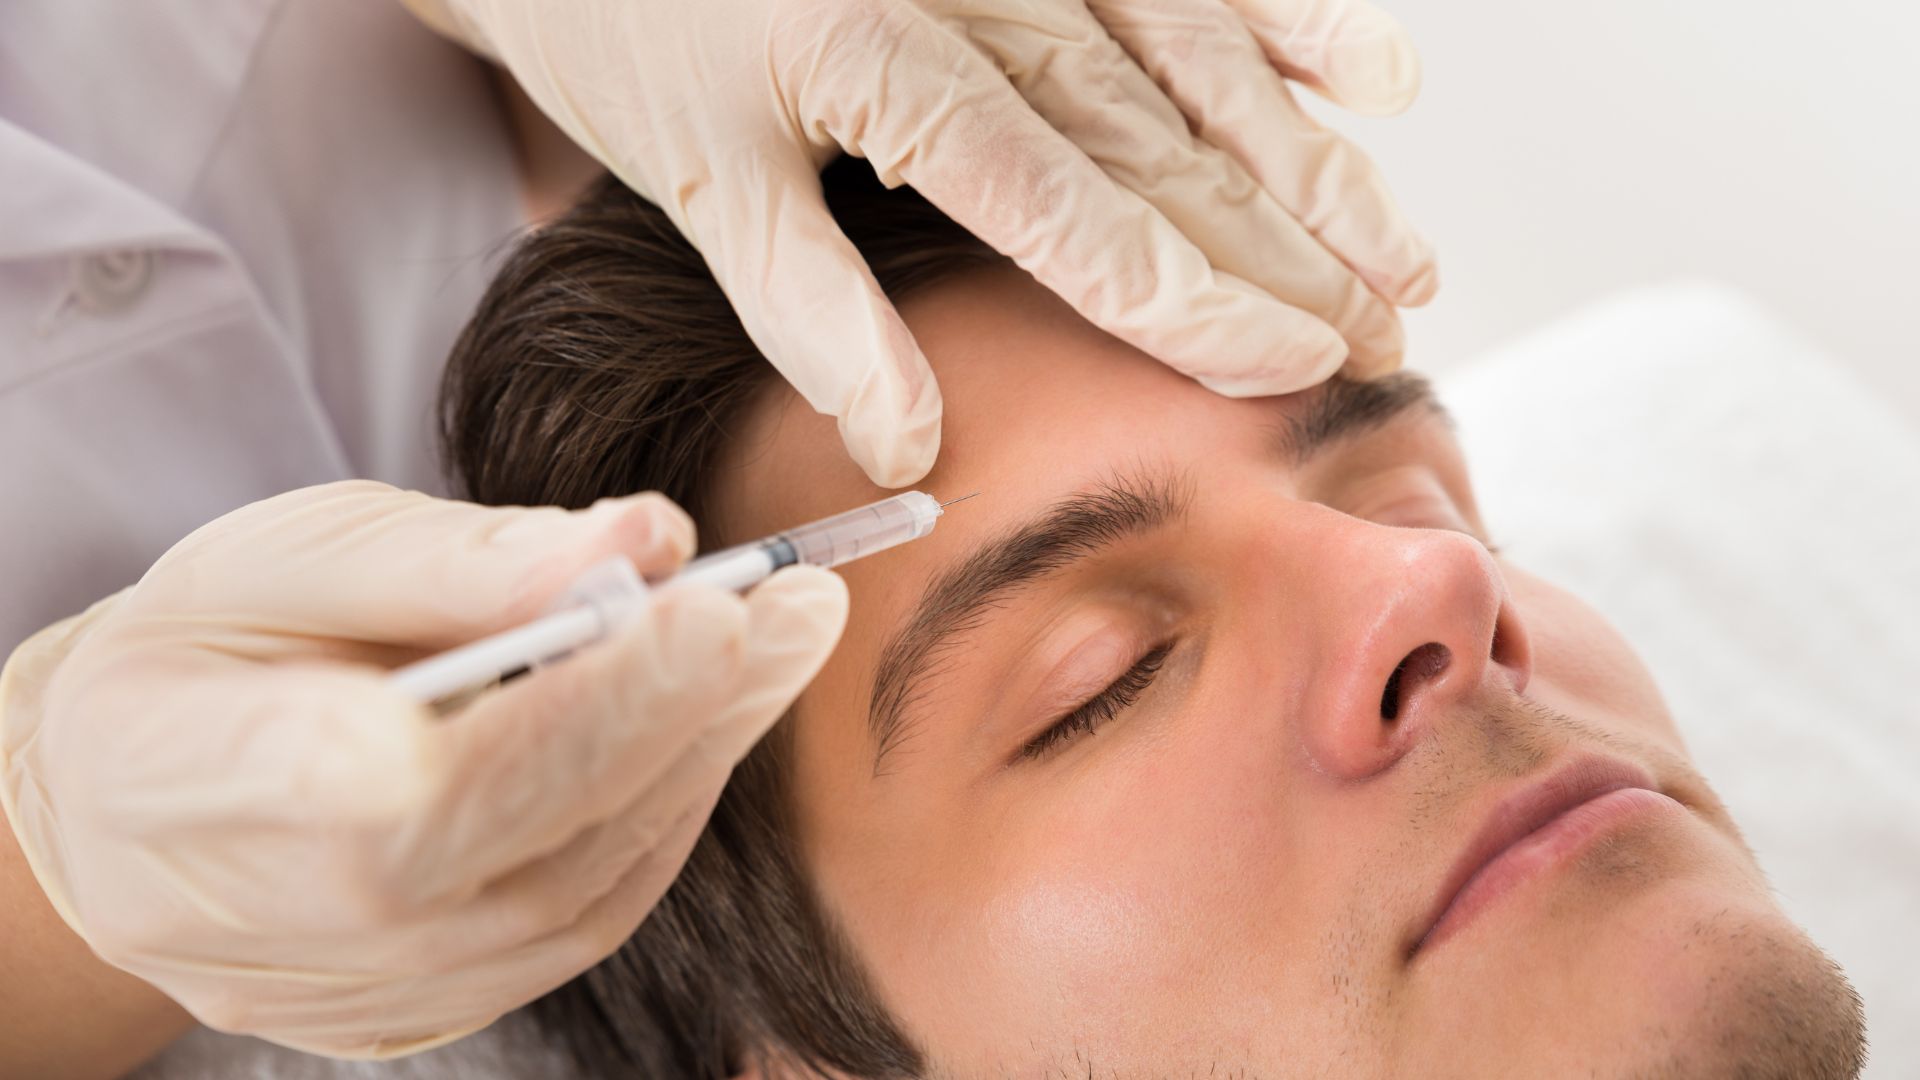 Treating Migraines With Botox: Here's What You Should Know